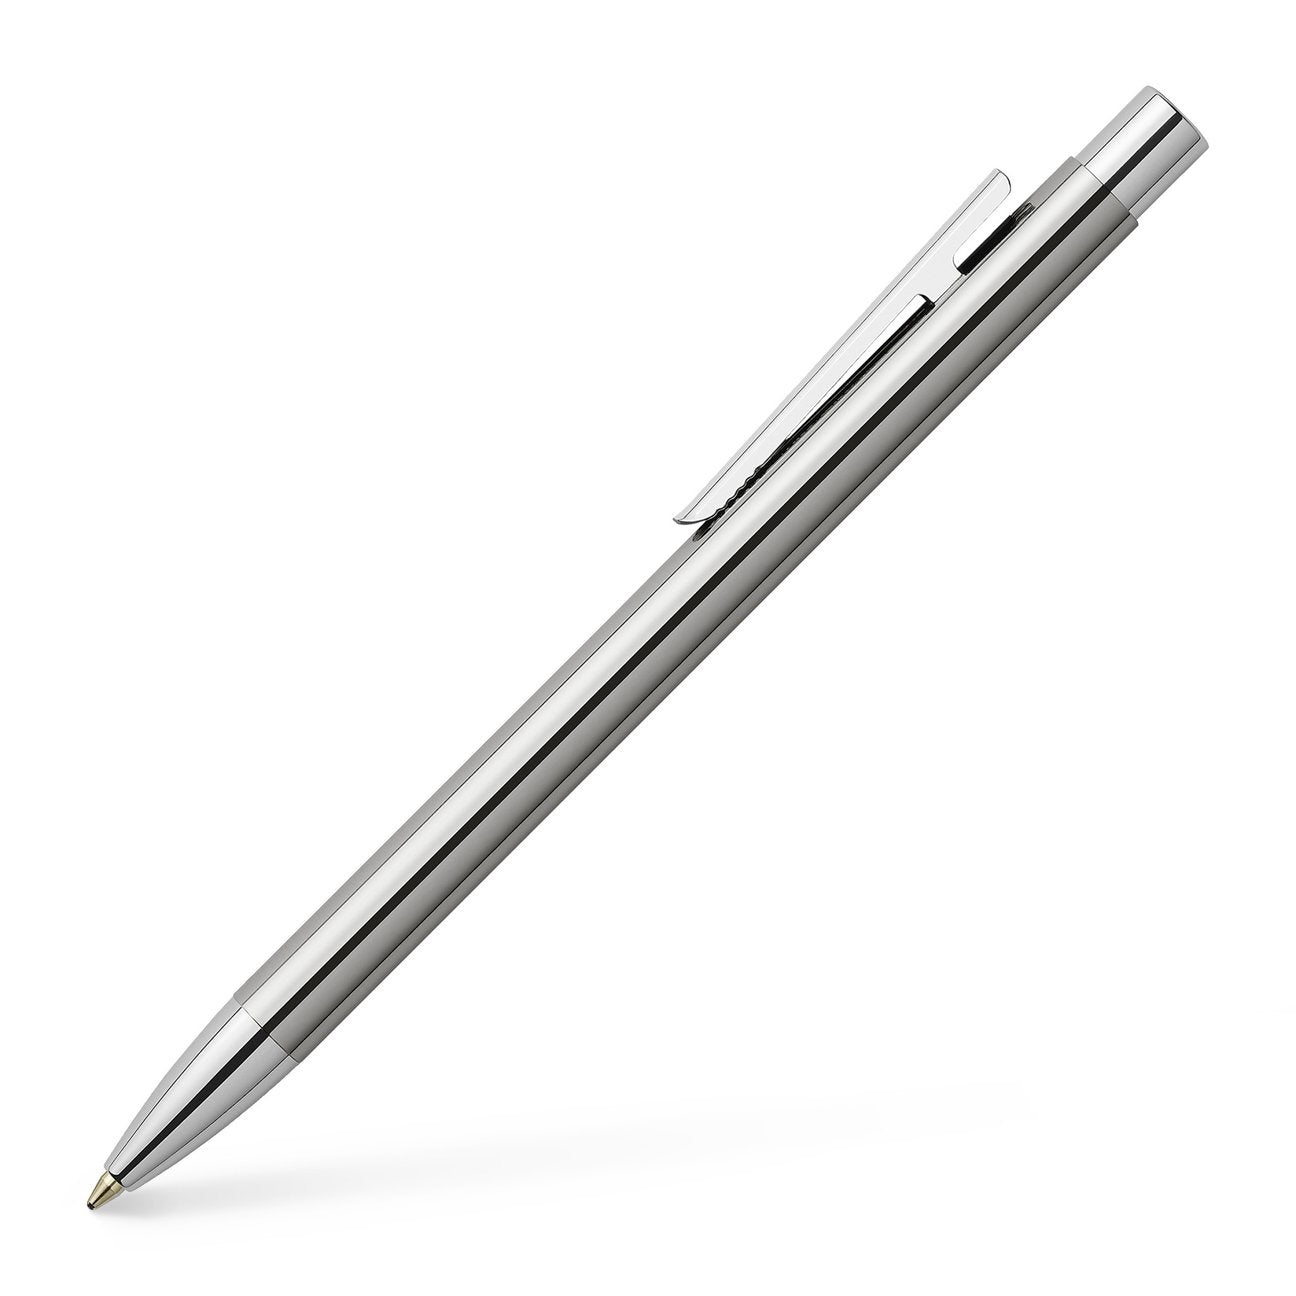 Faber-Castell Design Neo Slim Ballpoint - Polished Stainless Steel